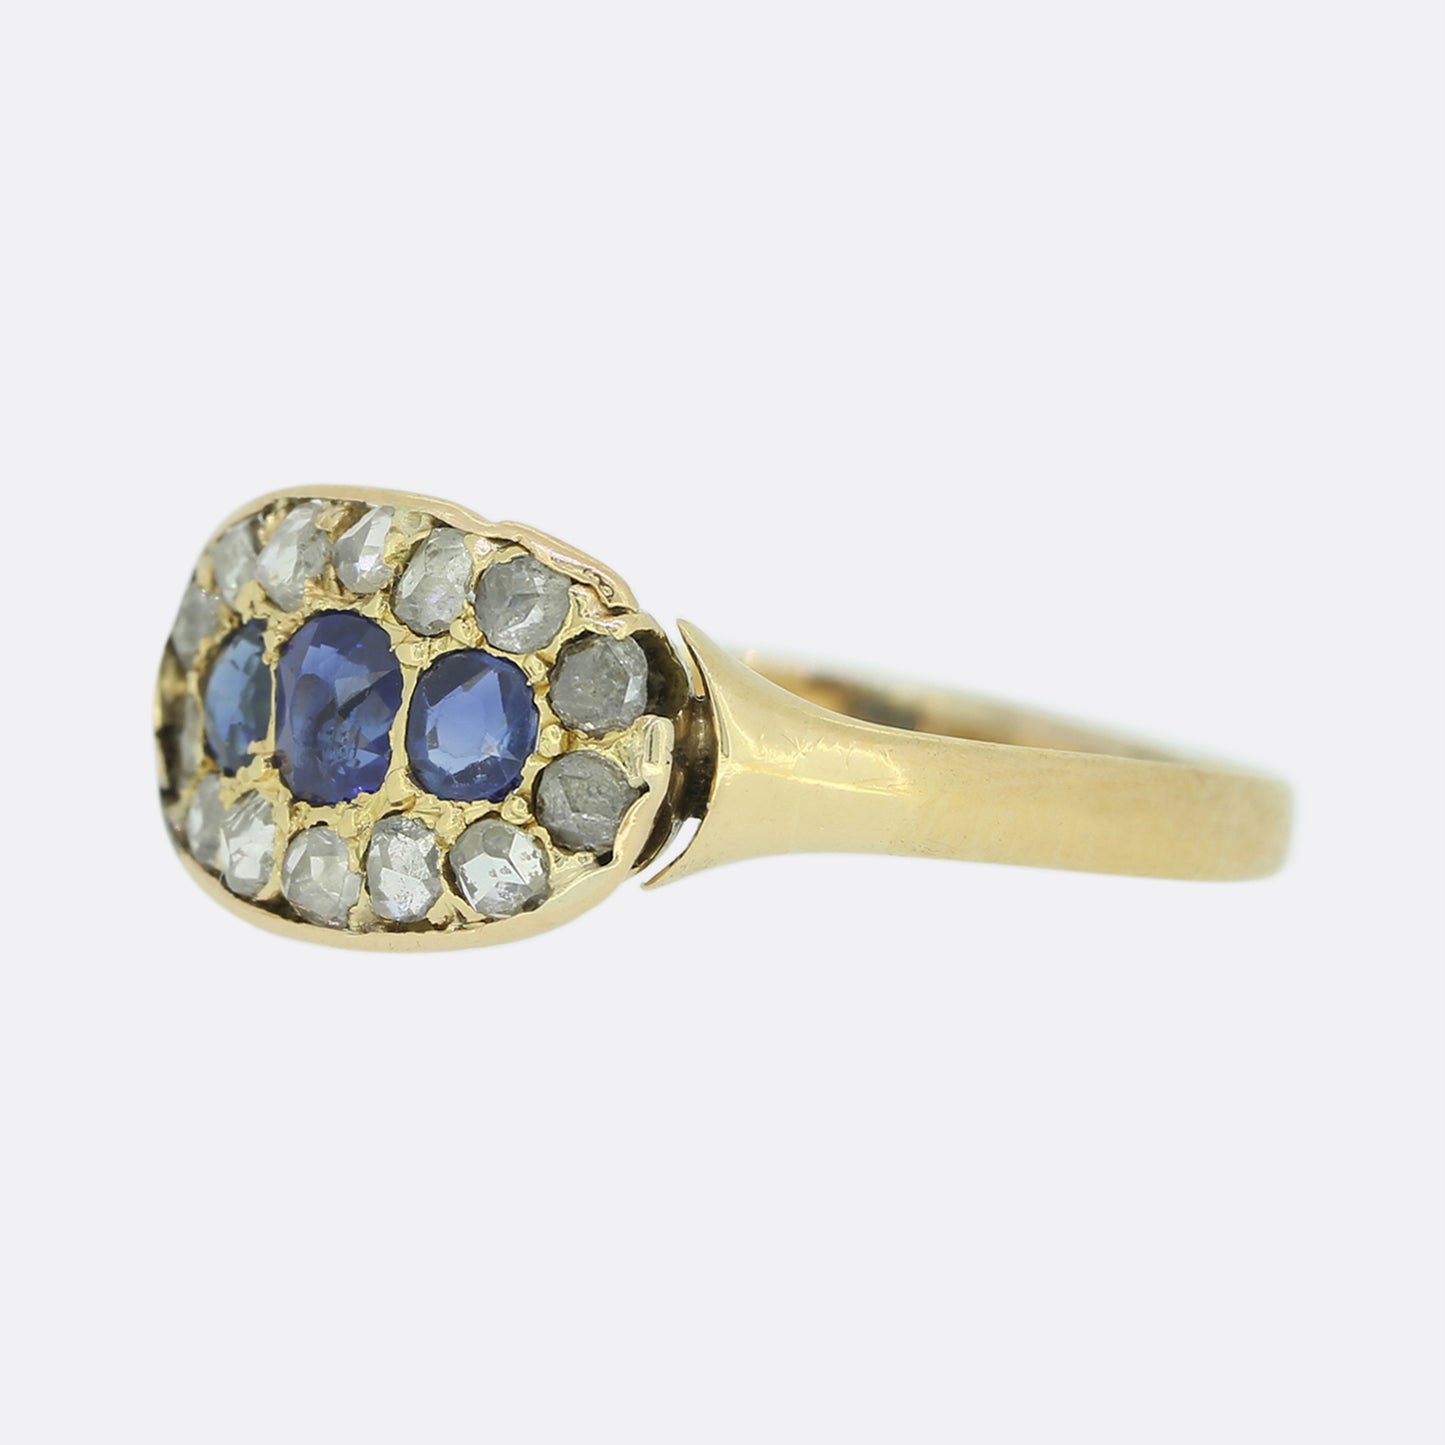 Victorian Sapphire and Diamond Cluster Ring